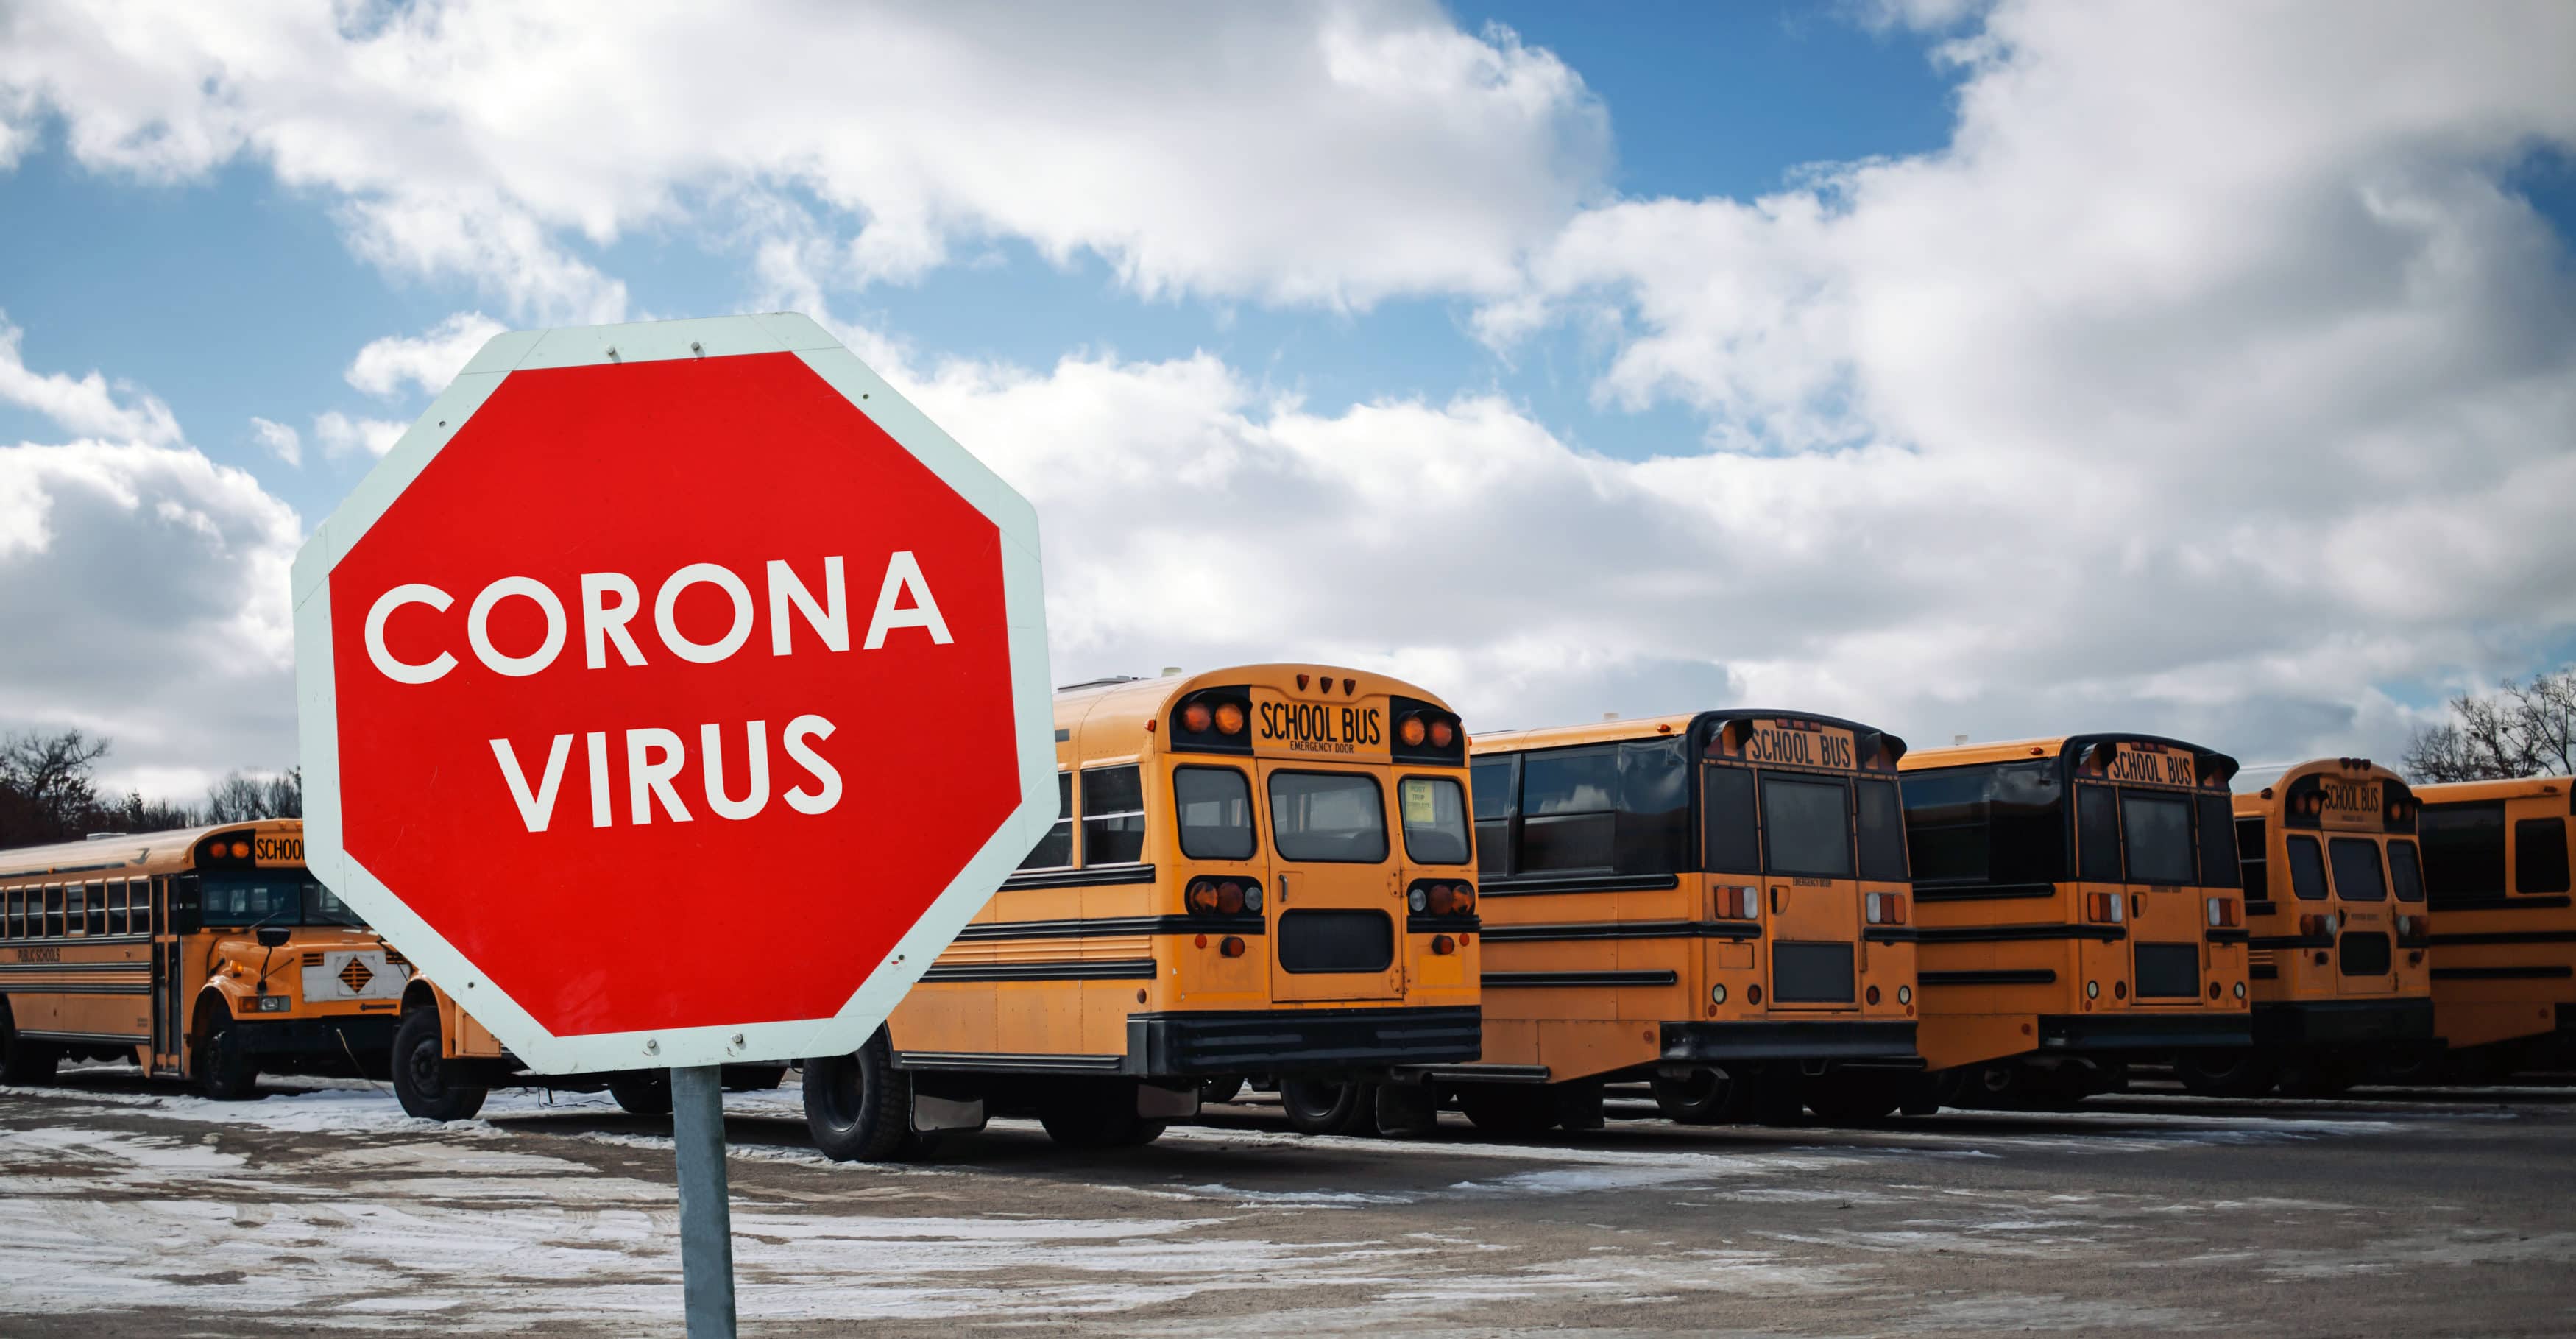 Red sign warning of coronavirus on a background of yellow school bus parking lot. Concept for closing schools or universities for quarantine because of covid-19 epidemic or pandemic outbreak